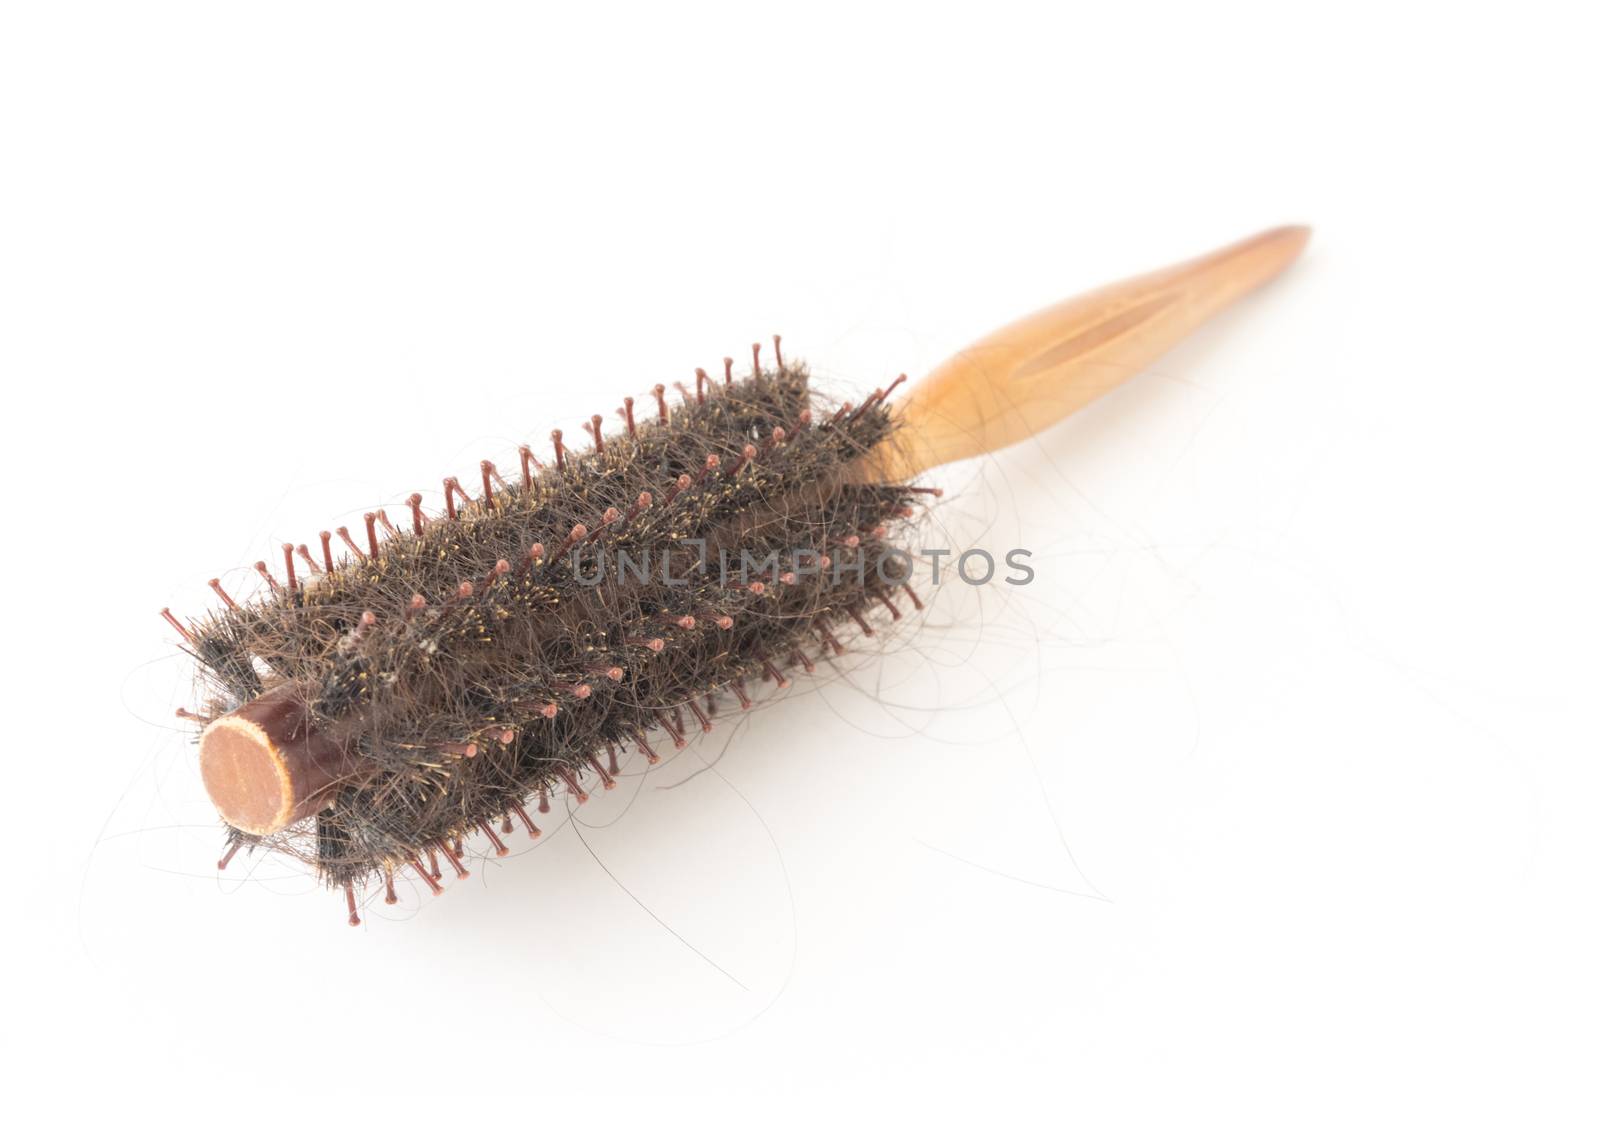 Comb brush with hair loss problem on white background, health ca by pt.pongsak@gmail.com